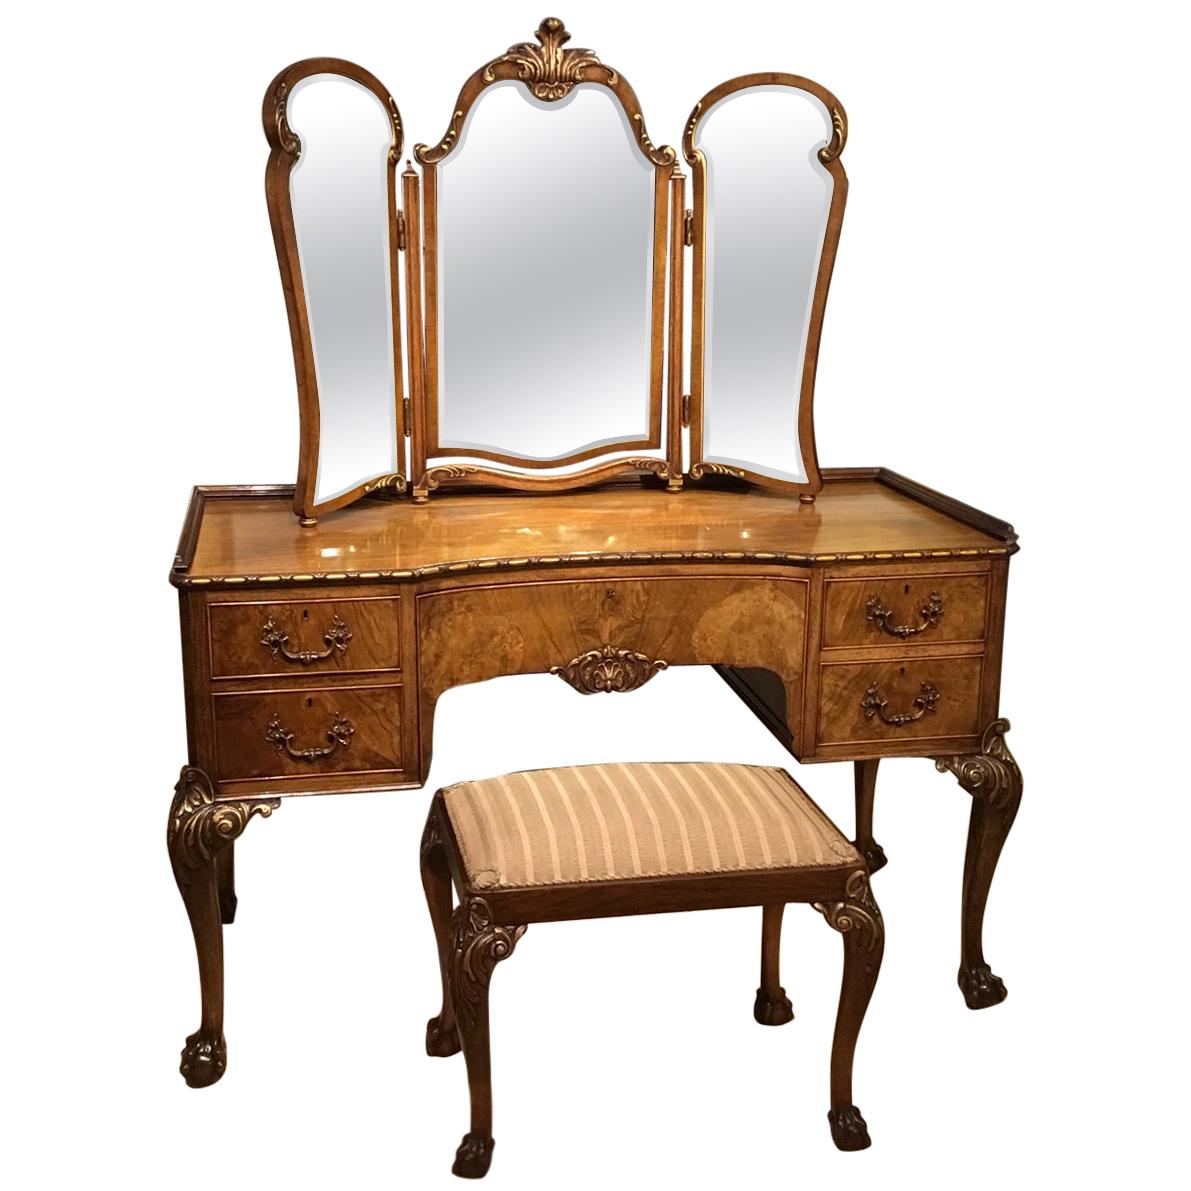 Walnut and Parcel Gilt Edwardian Period Antique Dressing Table and Stool